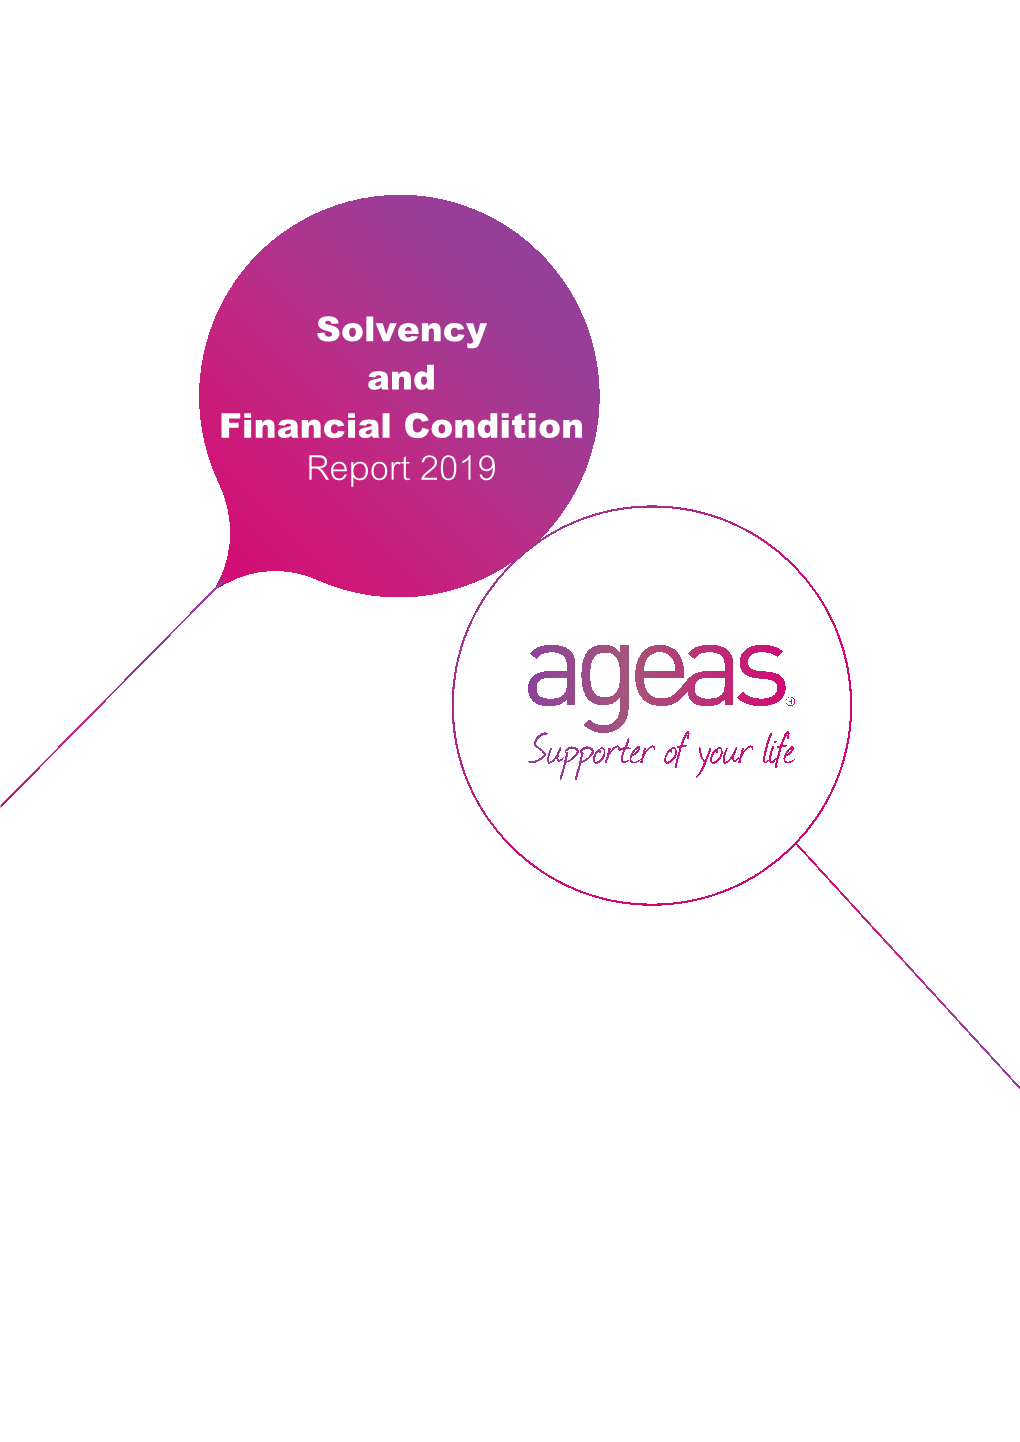 Solvency and Financial Condition Report 2019